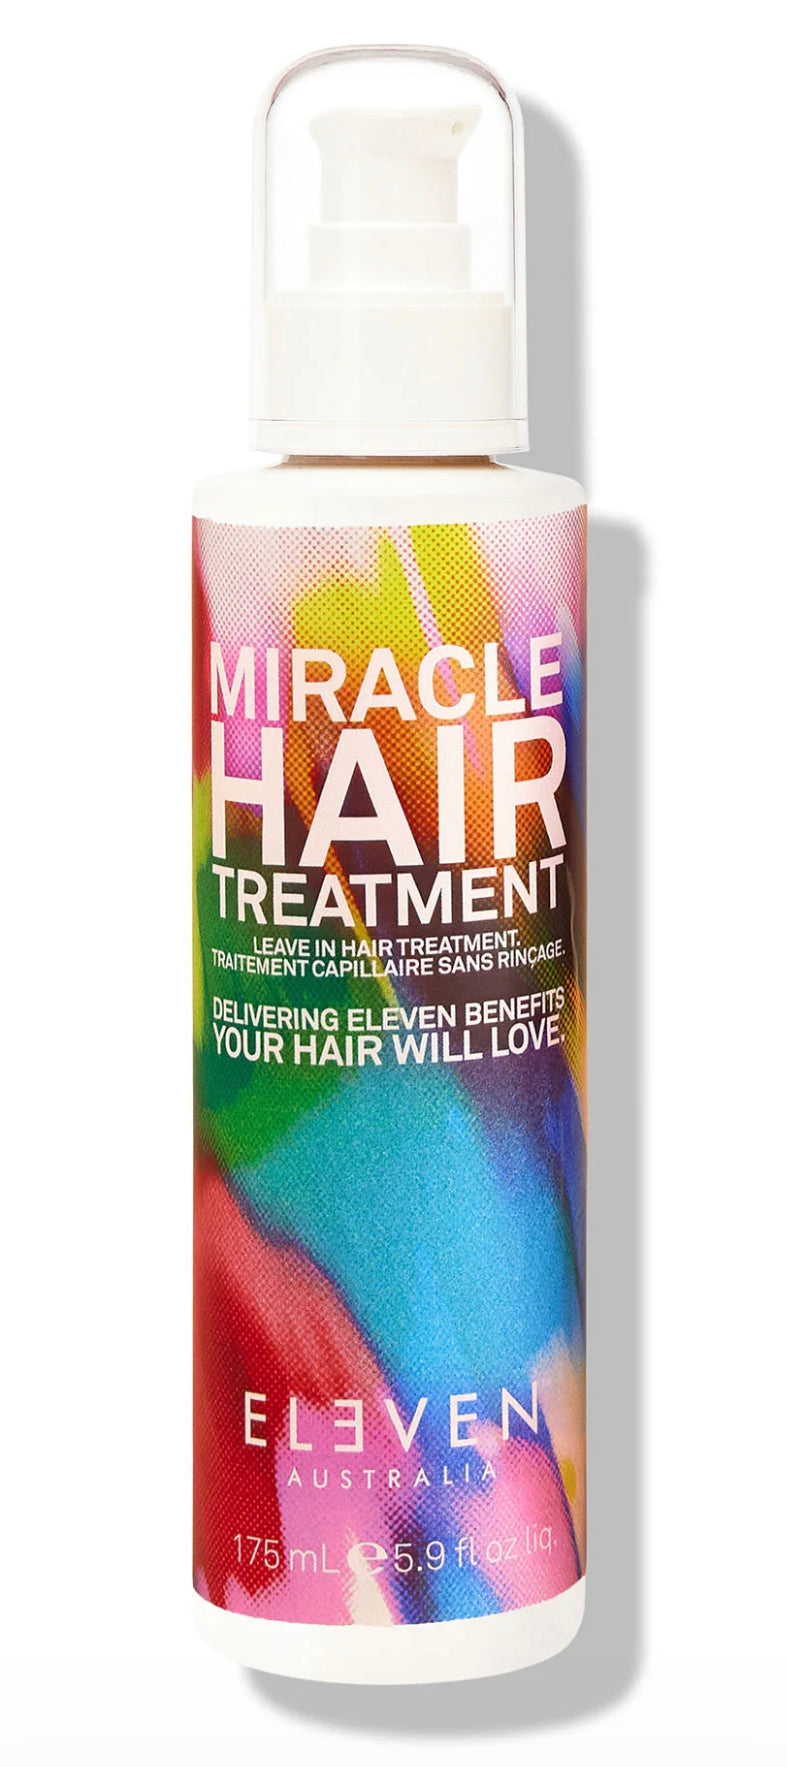 LIMITED EDITION MIRACLE HAIR TREATMENT